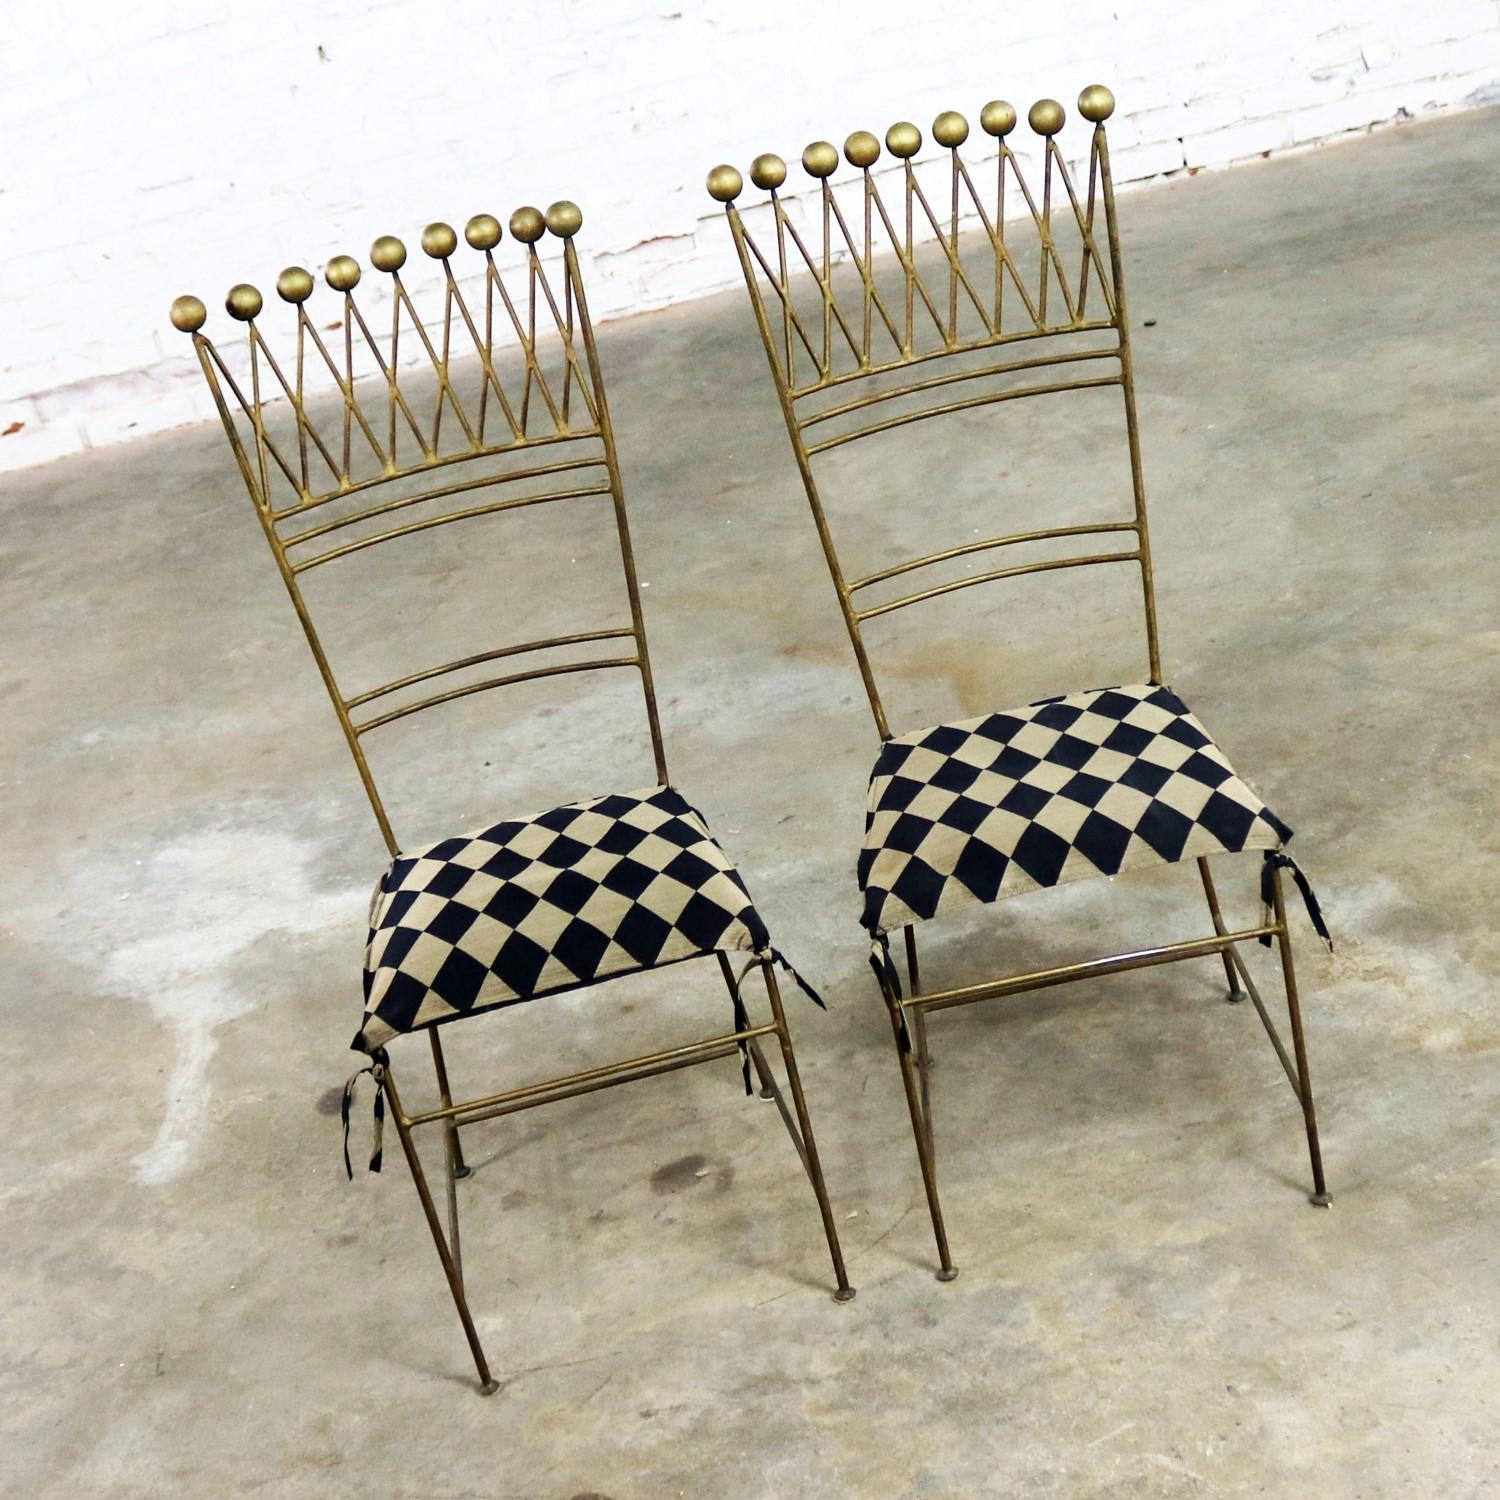 Awesome pair of gilt iron chairs in a harlequin style which look like a jester’s crown with ball finials across its top. We are calling them Art Deco or Hollywood Regency. They are in wonderful ready-to-use vintage condition. The gilded iron has